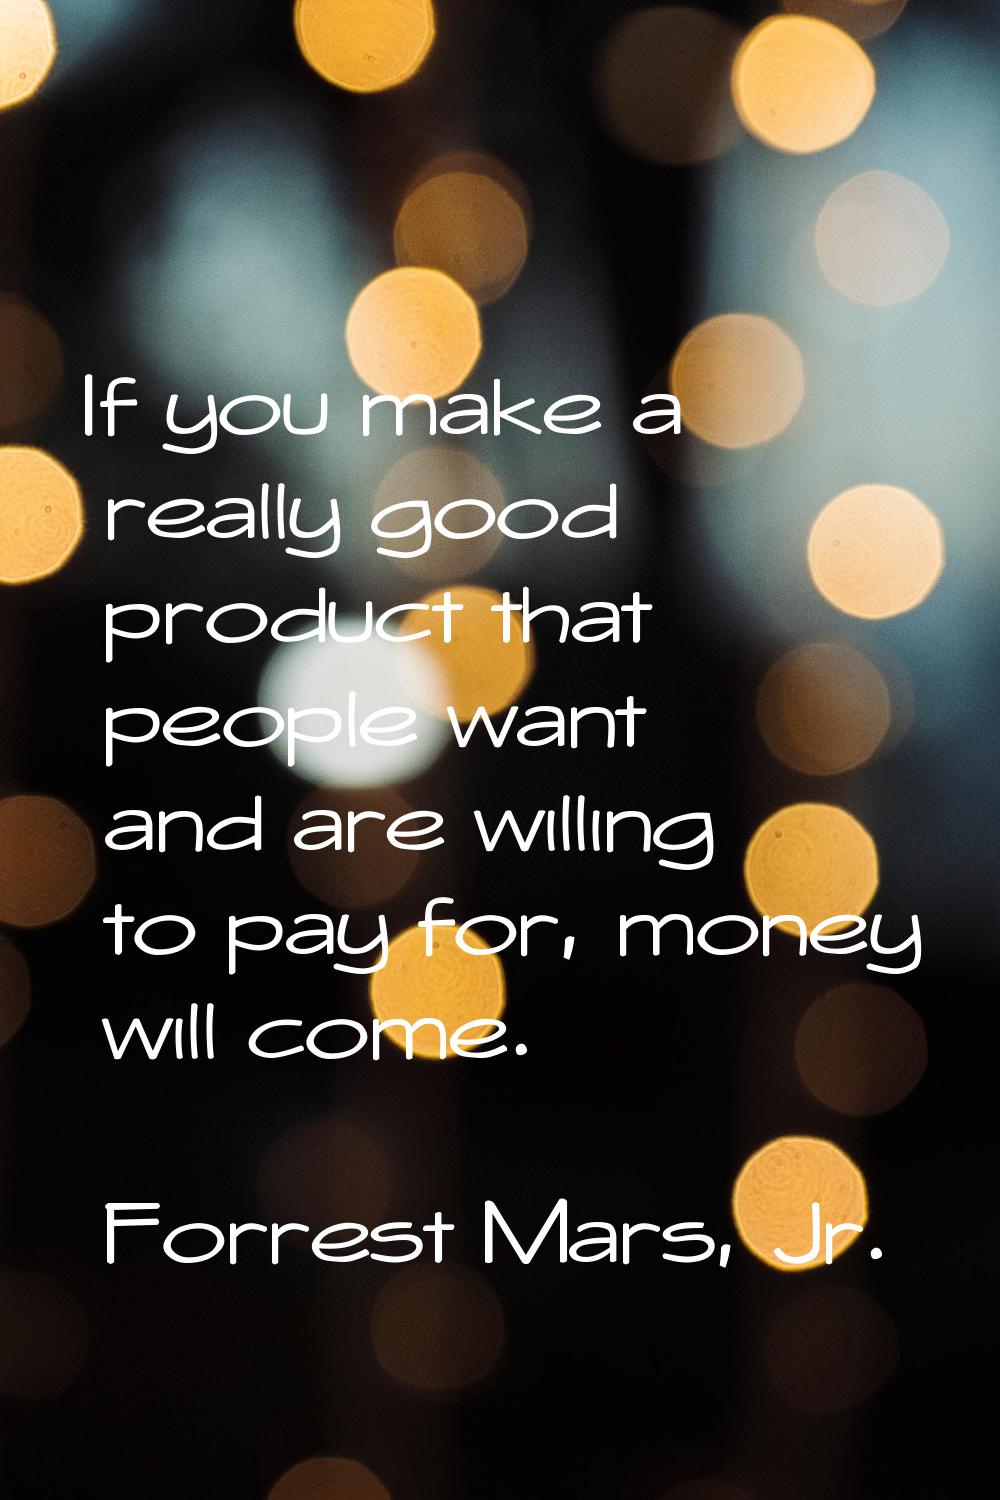 If you make a really good product that people want and are willing to pay for, money will come.